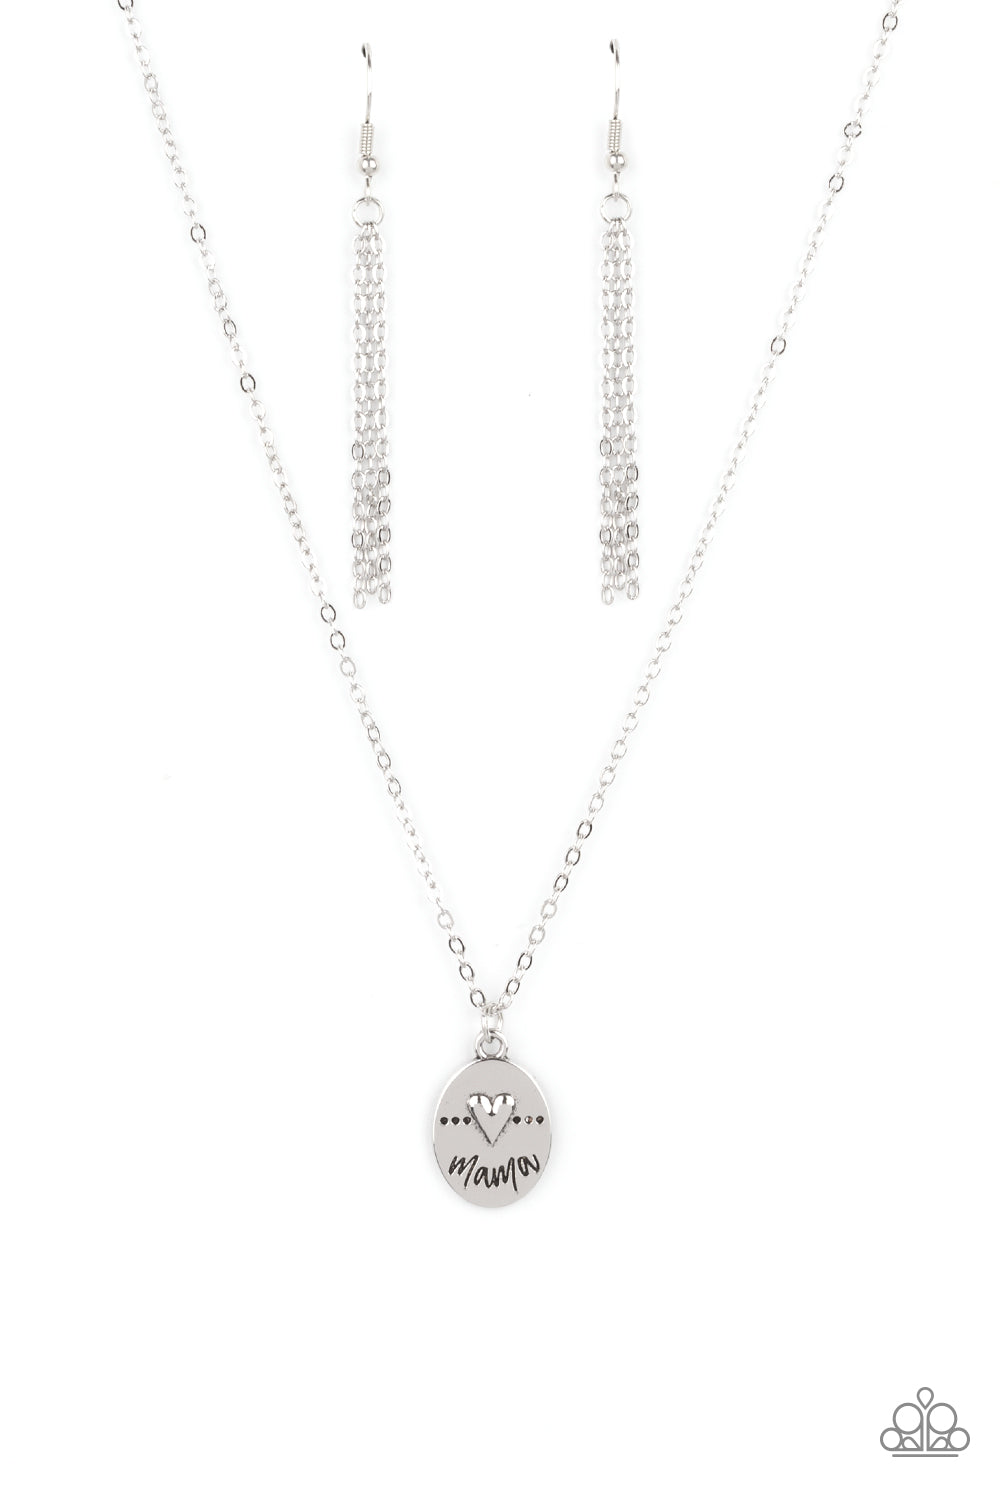 They Call Me Mama - silver - Paparazzi necklace